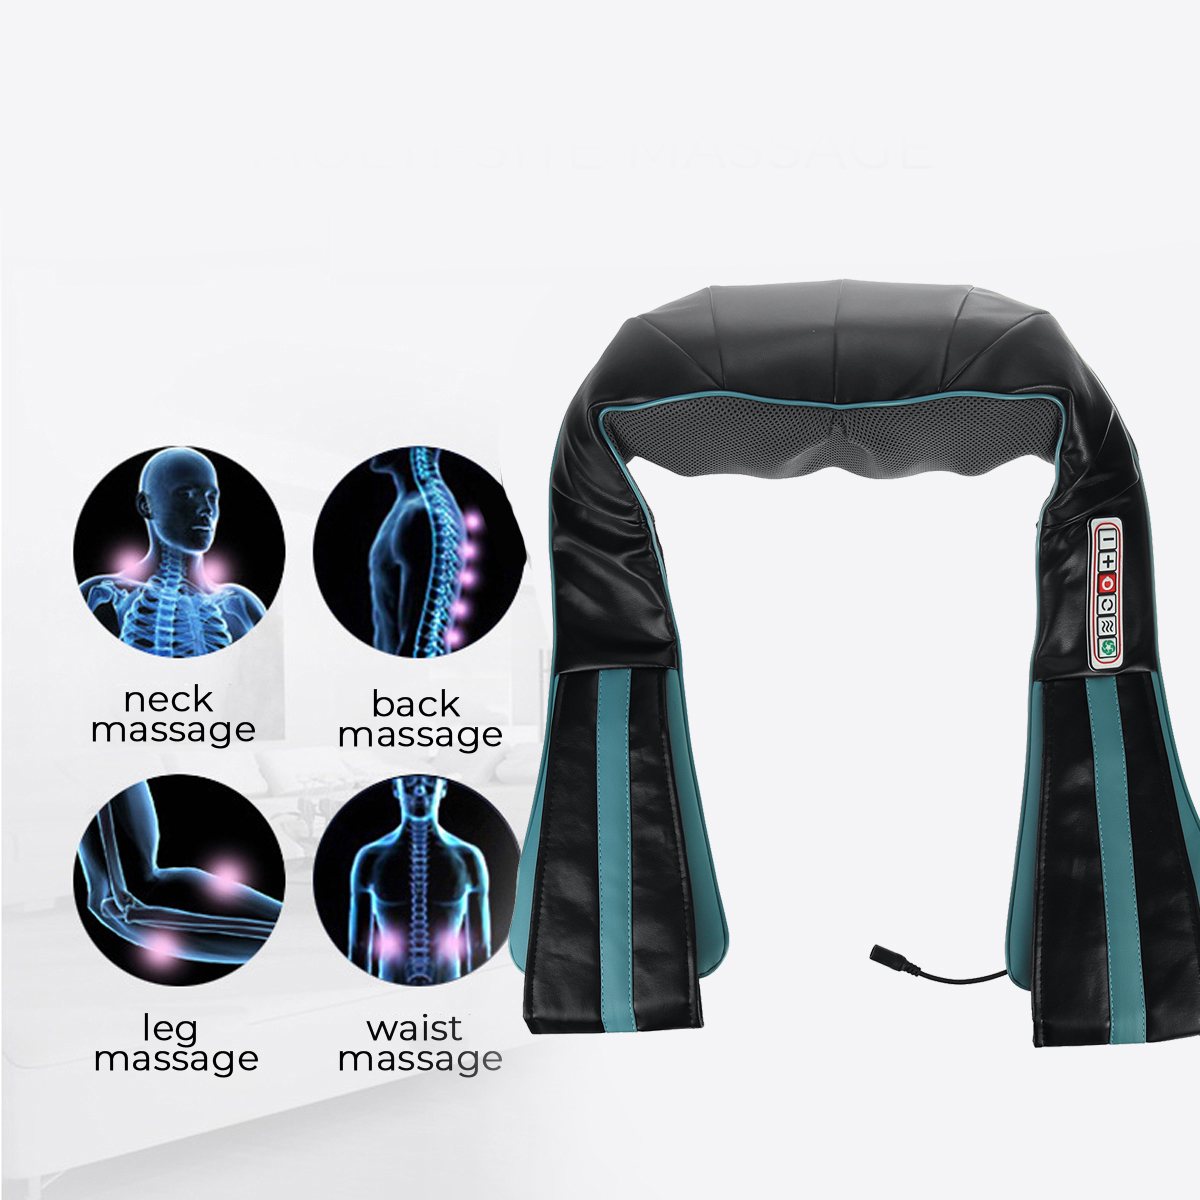 Intelligent-6-key-Button-Operation-Massage-Shawl-High-Temperature-Protection-Electric-Heating-Neck-B-1932348-2